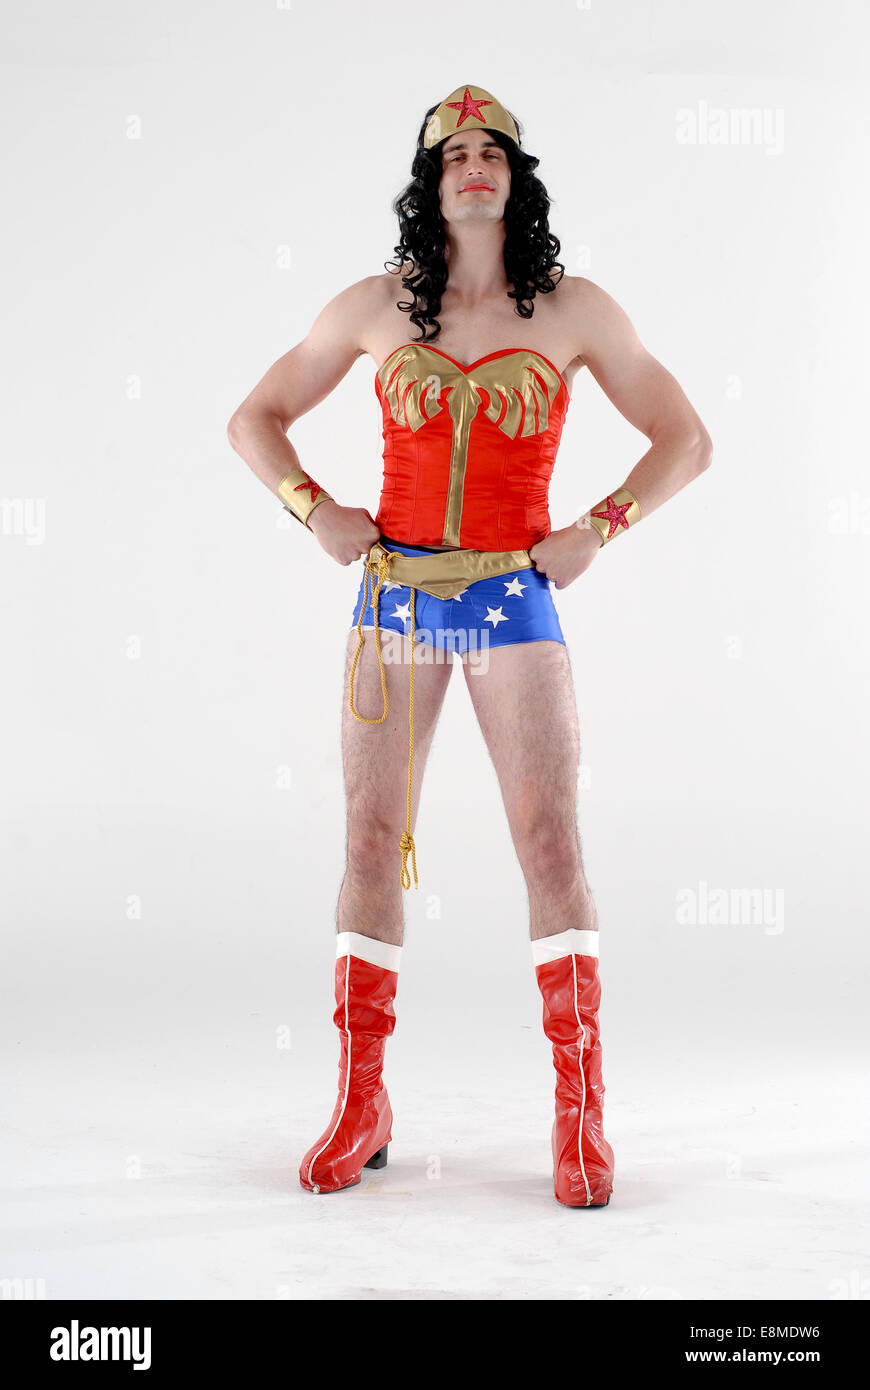 man in fancy dress comedy costume in a DC comics wonder woman super hero  outfit, with red boots, hot pants, wig and red top Stock Photo - Alamy